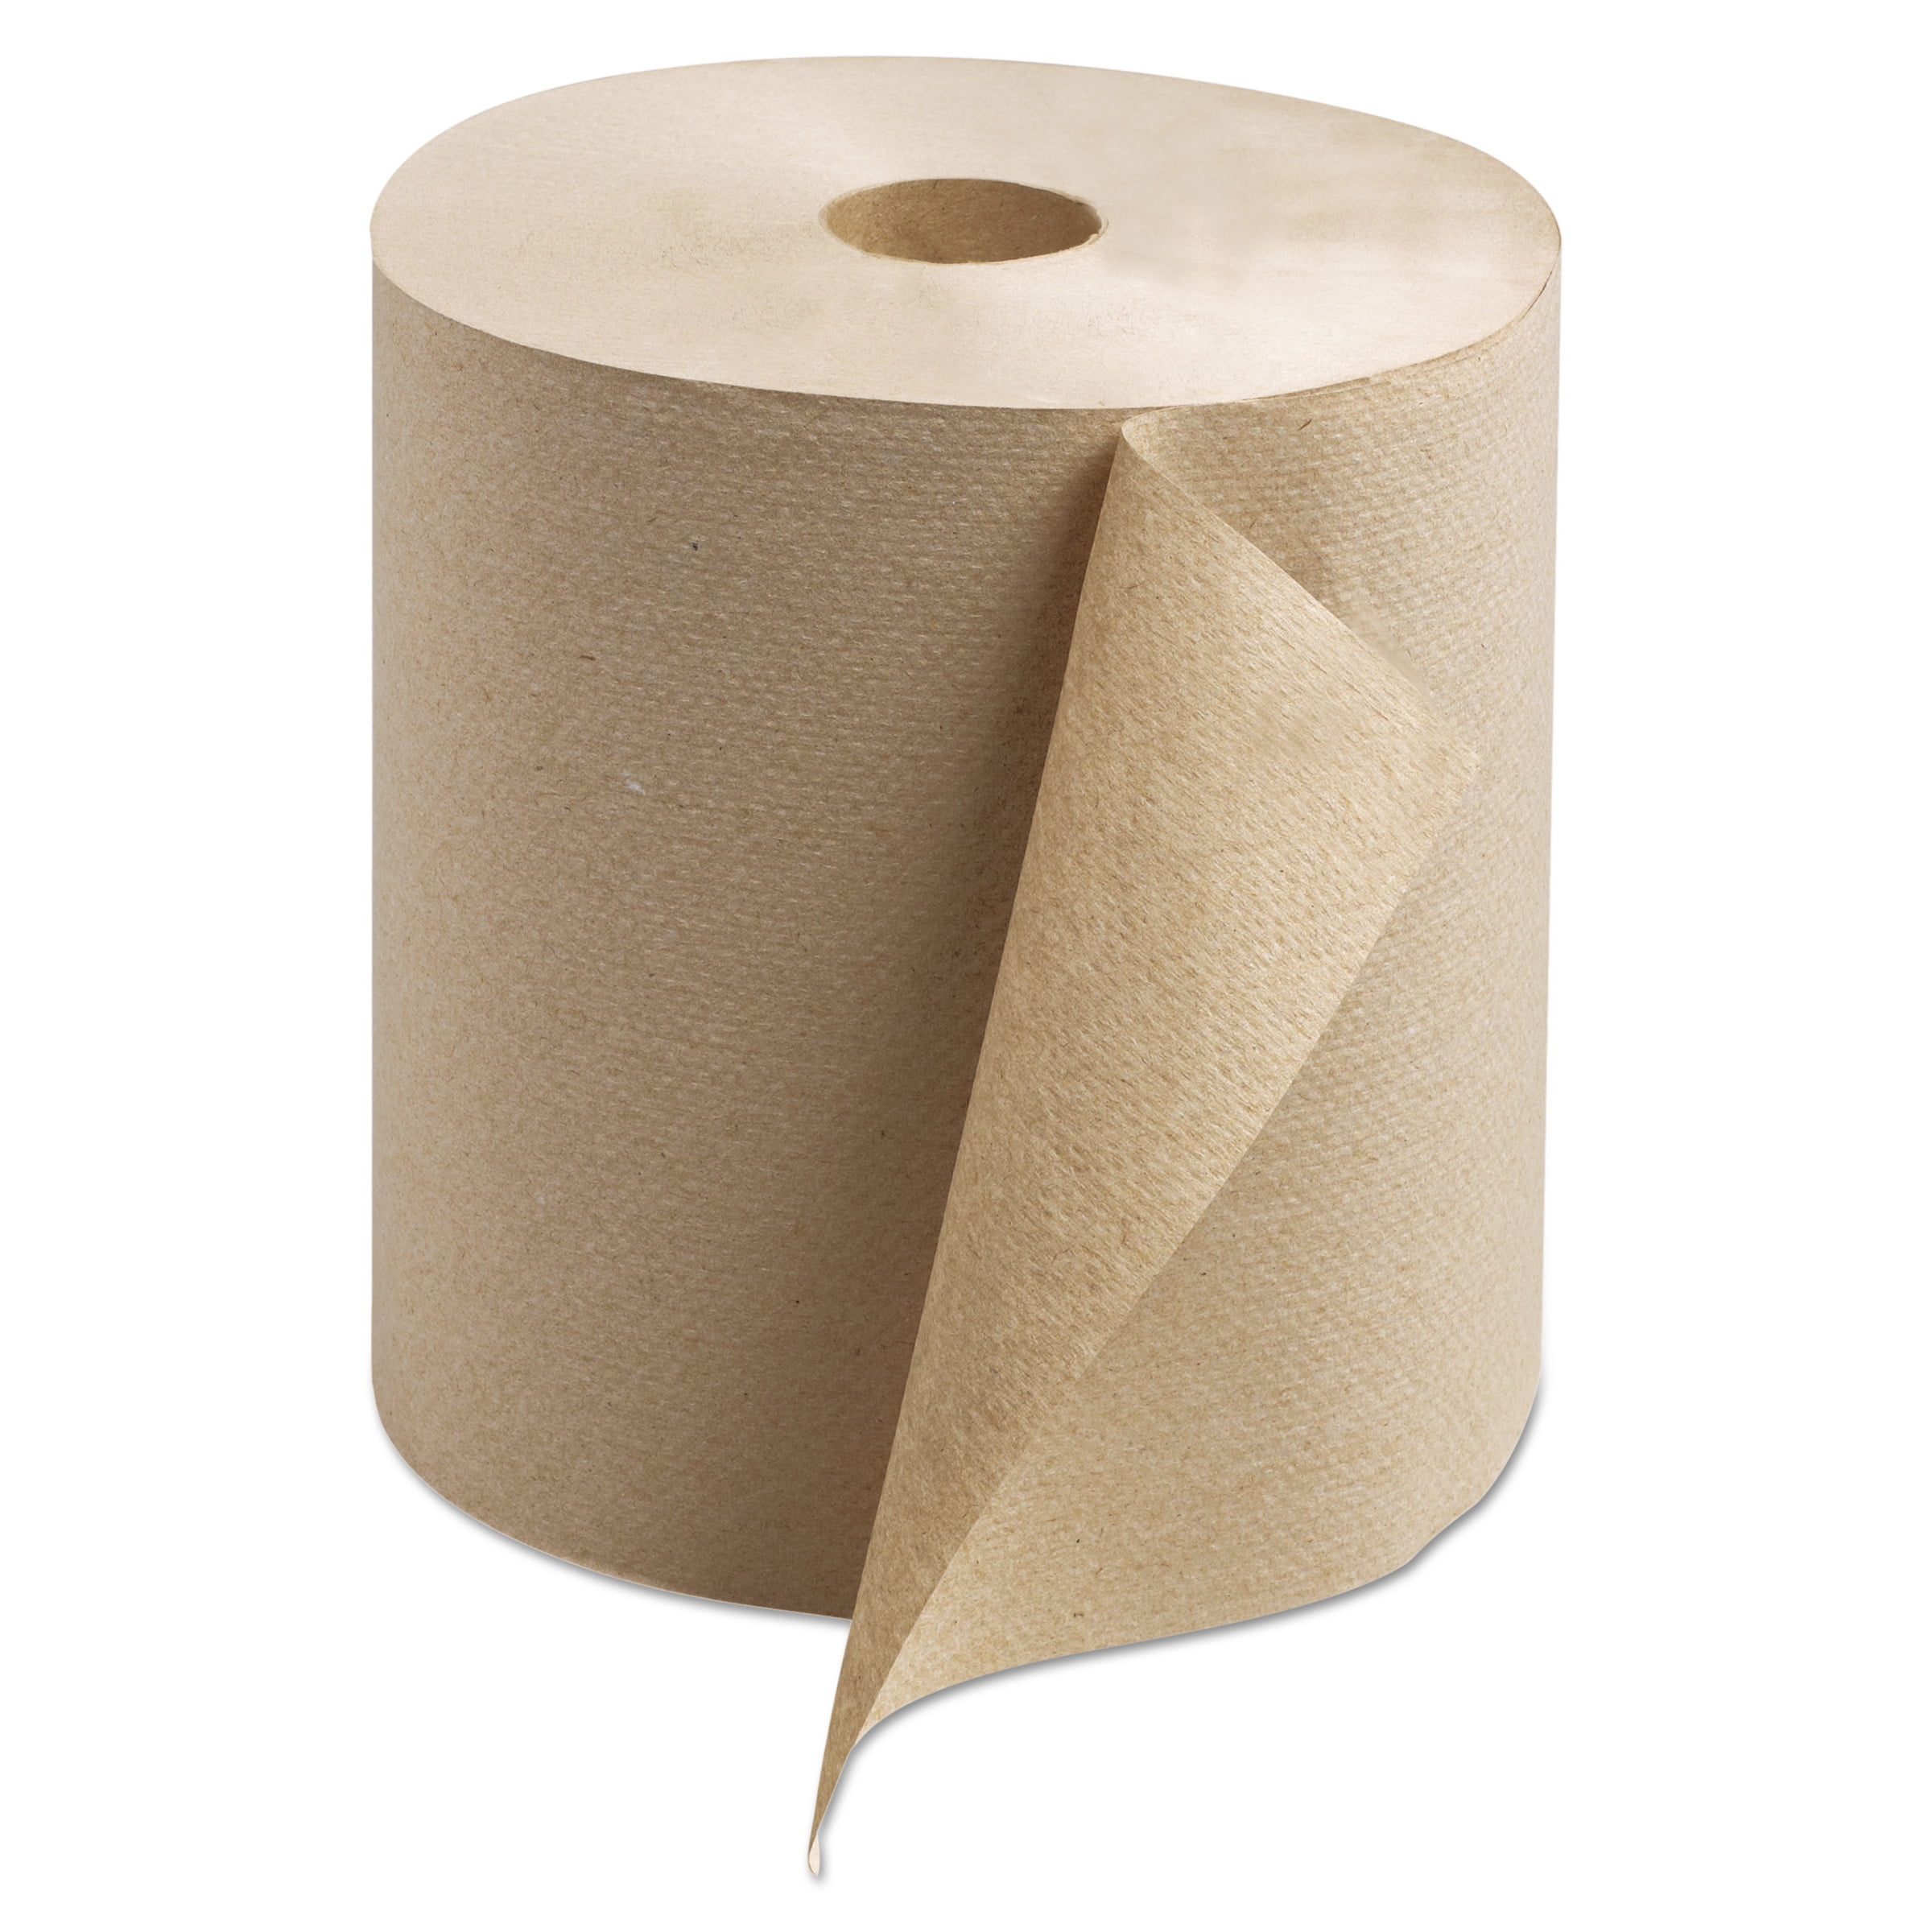 Case of 6 Rolls Y-Notched Natural Roll Towel 800' 